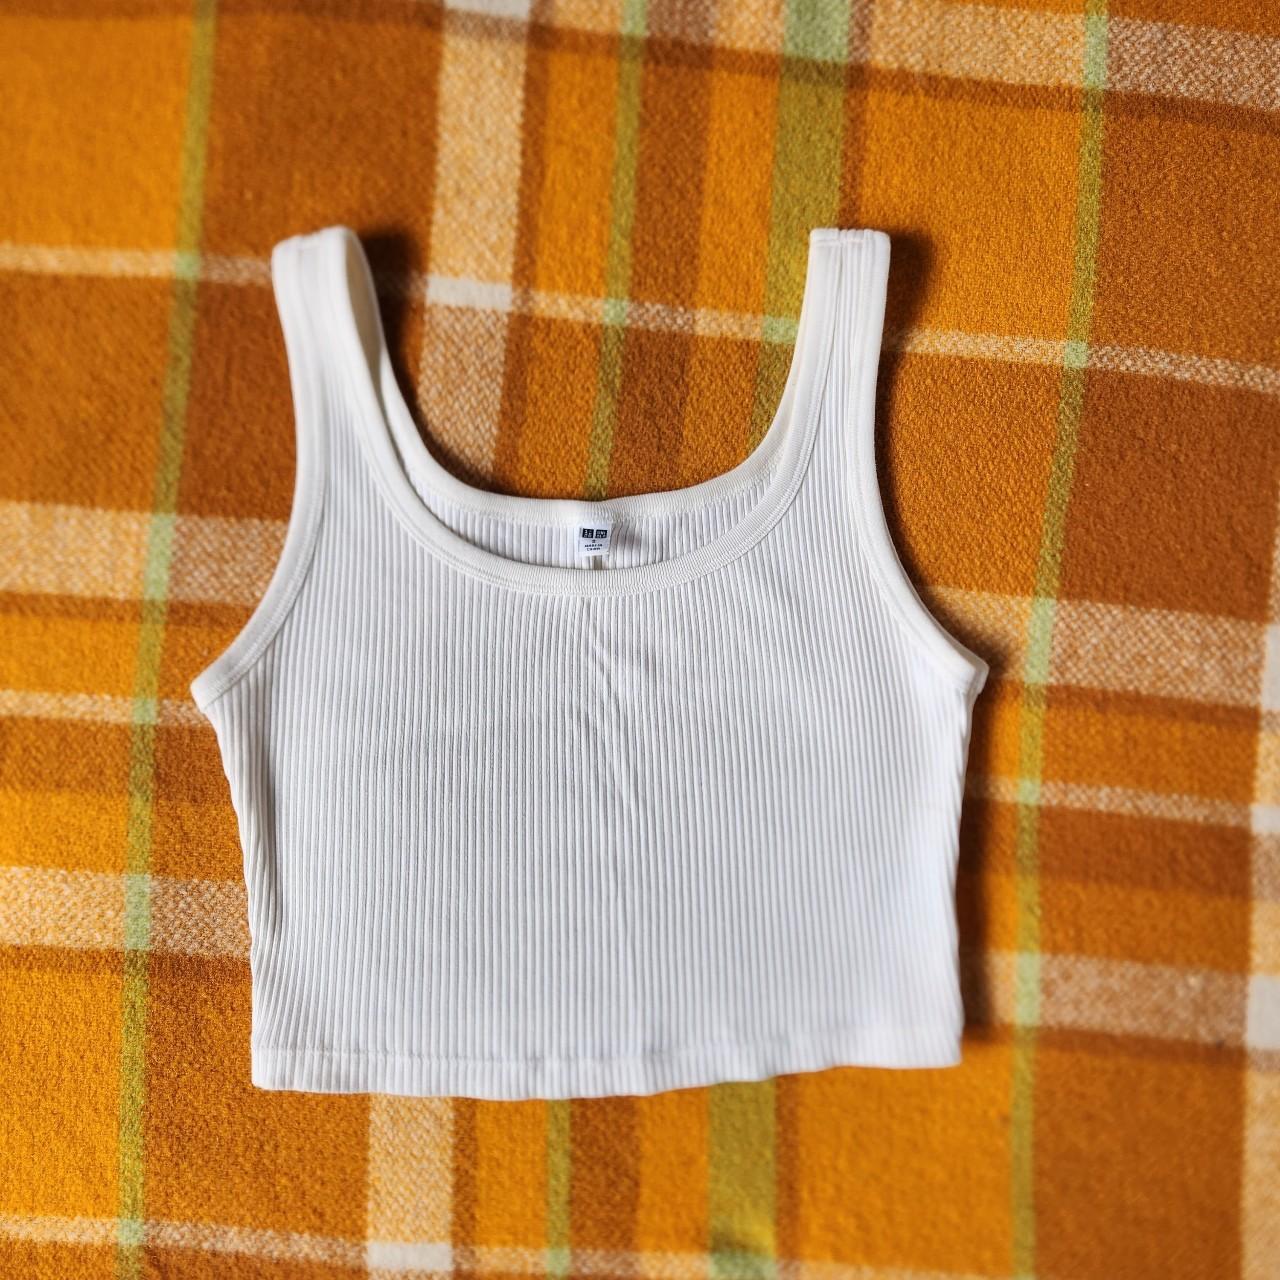 Uniqlo off white cropped tank top. A great basic to... - Depop